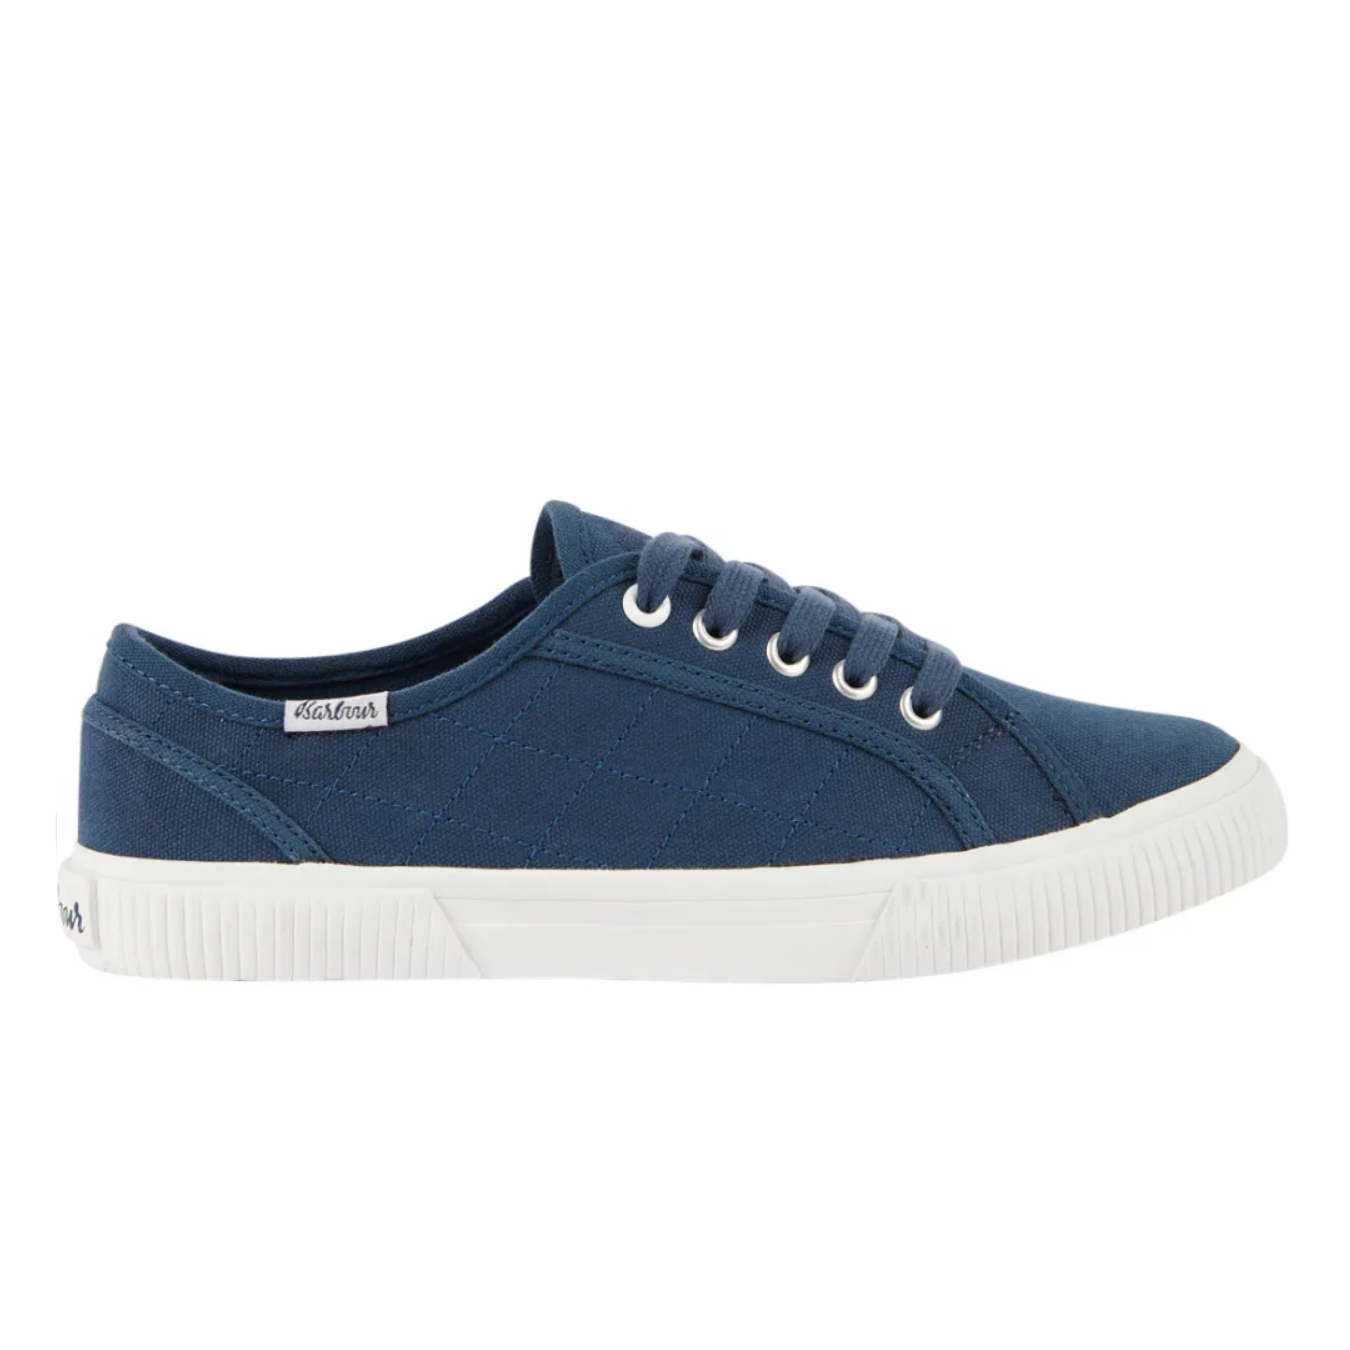 Barbour Seaholly trainer